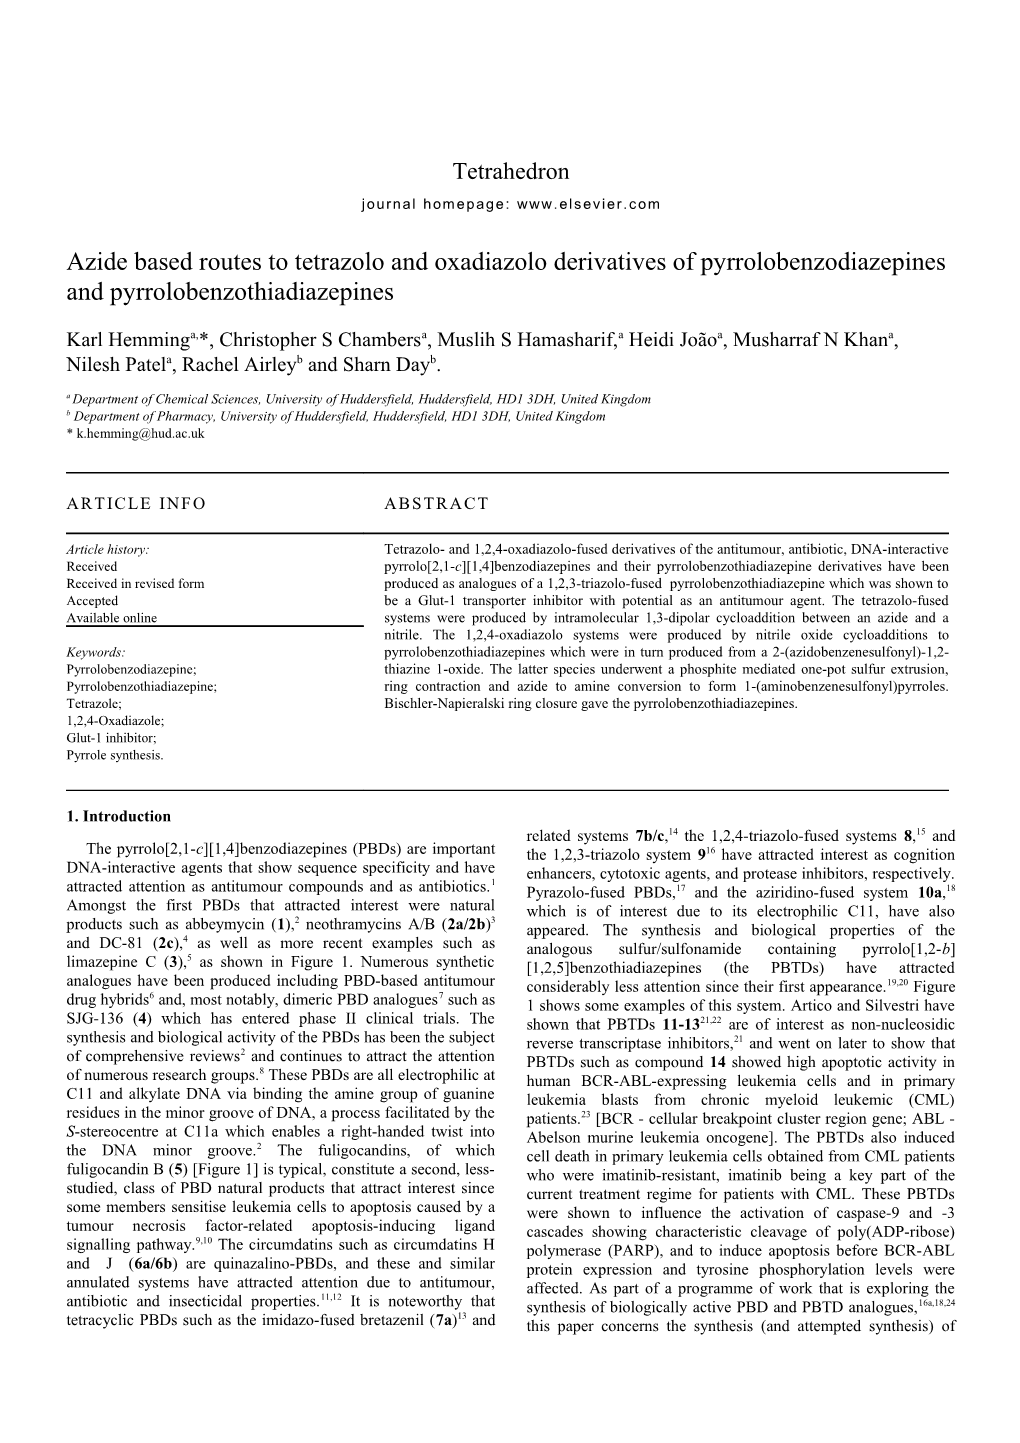 Azide Based Routes to Tetrazolo and Oxadiazolo Derivatives of Pyrrolobenzodiazepines And